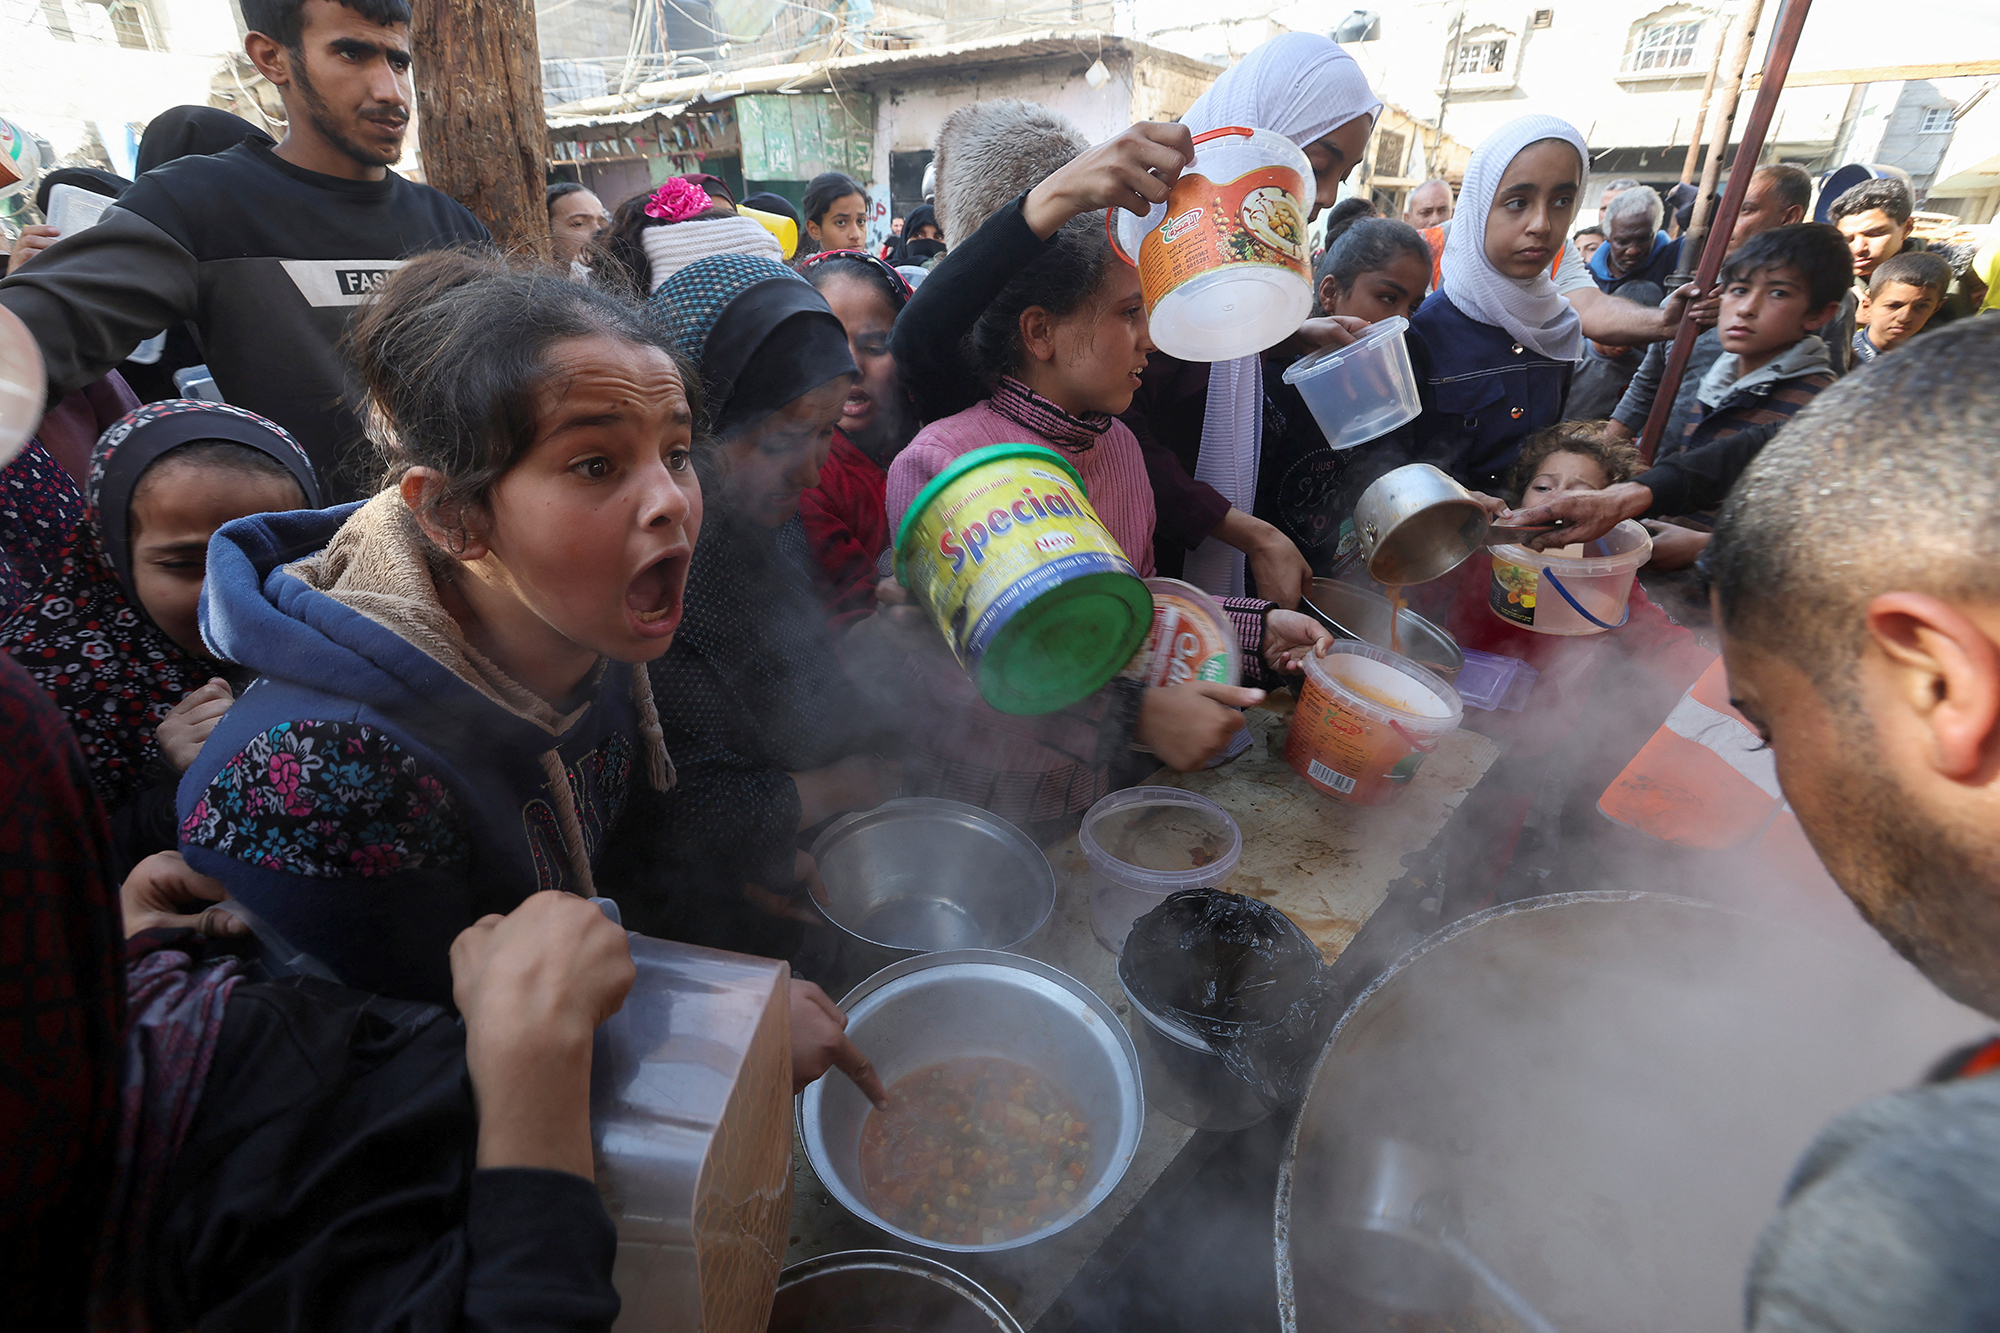 A Palestinian child reacts while people gather to get their share of charity food offered by volunteers amid food shortages in Rafah, Gaza, on December 2.